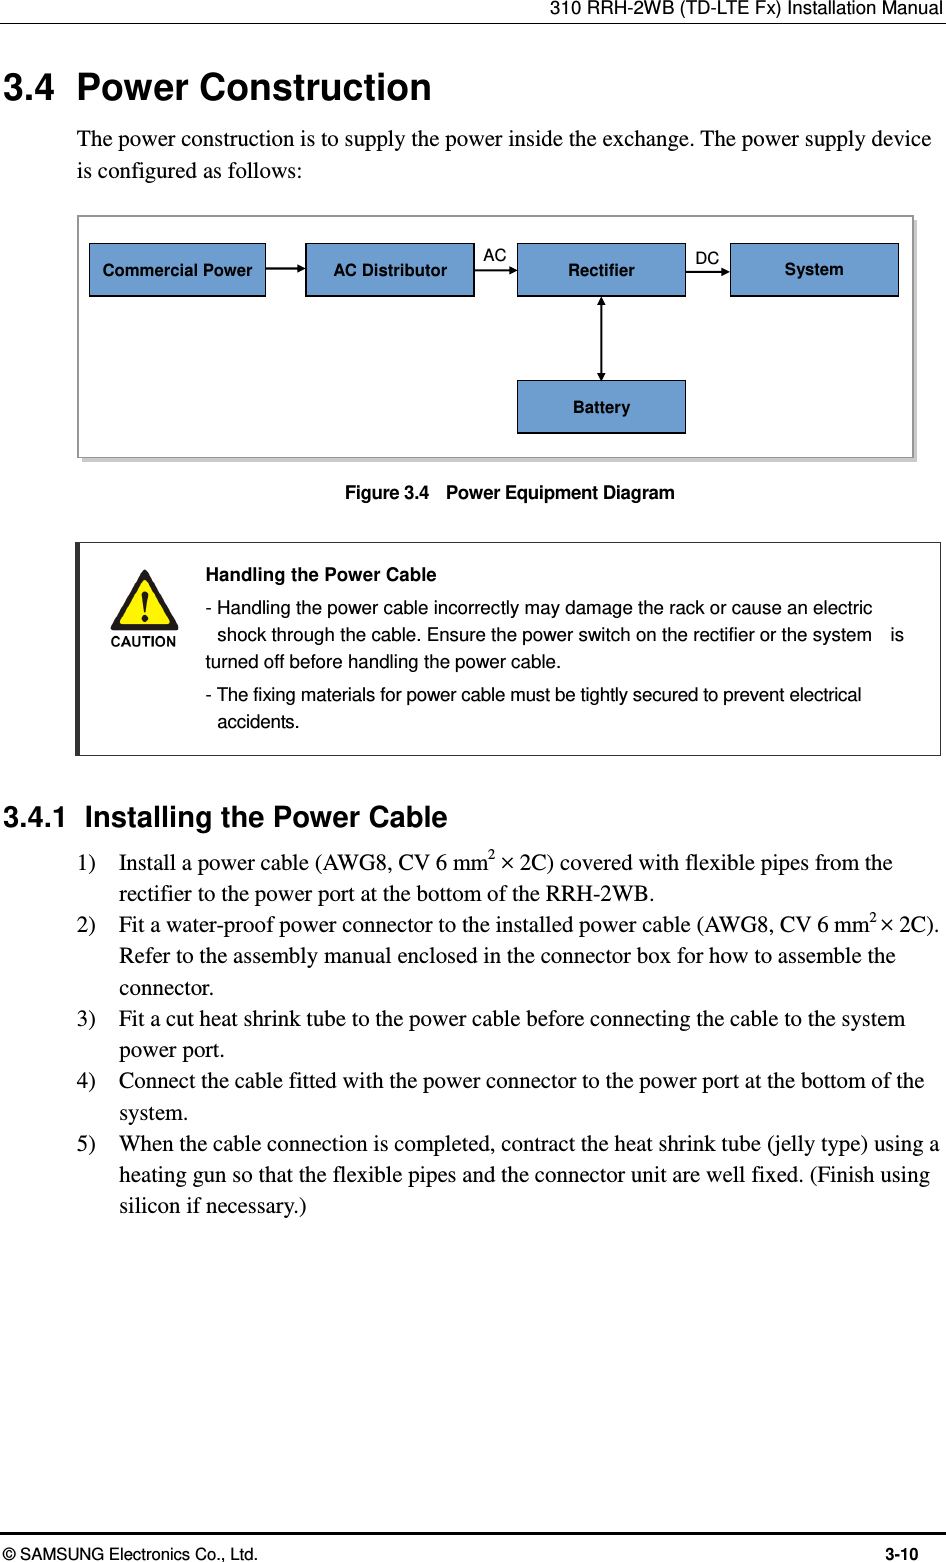 310 RRH-2WB (TD-LTE Fx) Installation Manual  © SAMSUNG Electronics Co., Ltd.  3-10 3.4  Power Construction The power construction is to supply the power inside the exchange. The power supply device is configured as follows:  Figure 3.4    Power Equipment Diagram   Handling the Power Cable   - Handling the power cable incorrectly may damage the rack or cause an electric   shock through the cable. Ensure the power switch on the rectifier or the system    is turned off before handling the power cable.   - The fixing materials for power cable must be tightly secured to prevent electrical   accidents.  3.4.1  Installing the Power Cable 1)    Install a power cable (AWG8, CV 6 mm2 × 2C) covered with flexible pipes from the rectifier to the power port at the bottom of the RRH-2WB. 2)    Fit a water-proof power connector to the installed power cable (AWG8, CV 6 mm2 × 2C). Refer to the assembly manual enclosed in the connector box for how to assemble the connector. 3)    Fit a cut heat shrink tube to the power cable before connecting the cable to the system power port. 4)    Connect the cable fitted with the power connector to the power port at the bottom of the system. 5)    When the cable connection is completed, contract the heat shrink tube (jelly type) using a heating gun so that the flexible pipes and the connector unit are well fixed. (Finish using silicon if necessary.)   AC AC Distributor Commercial Power DC System Rectifier Battery 